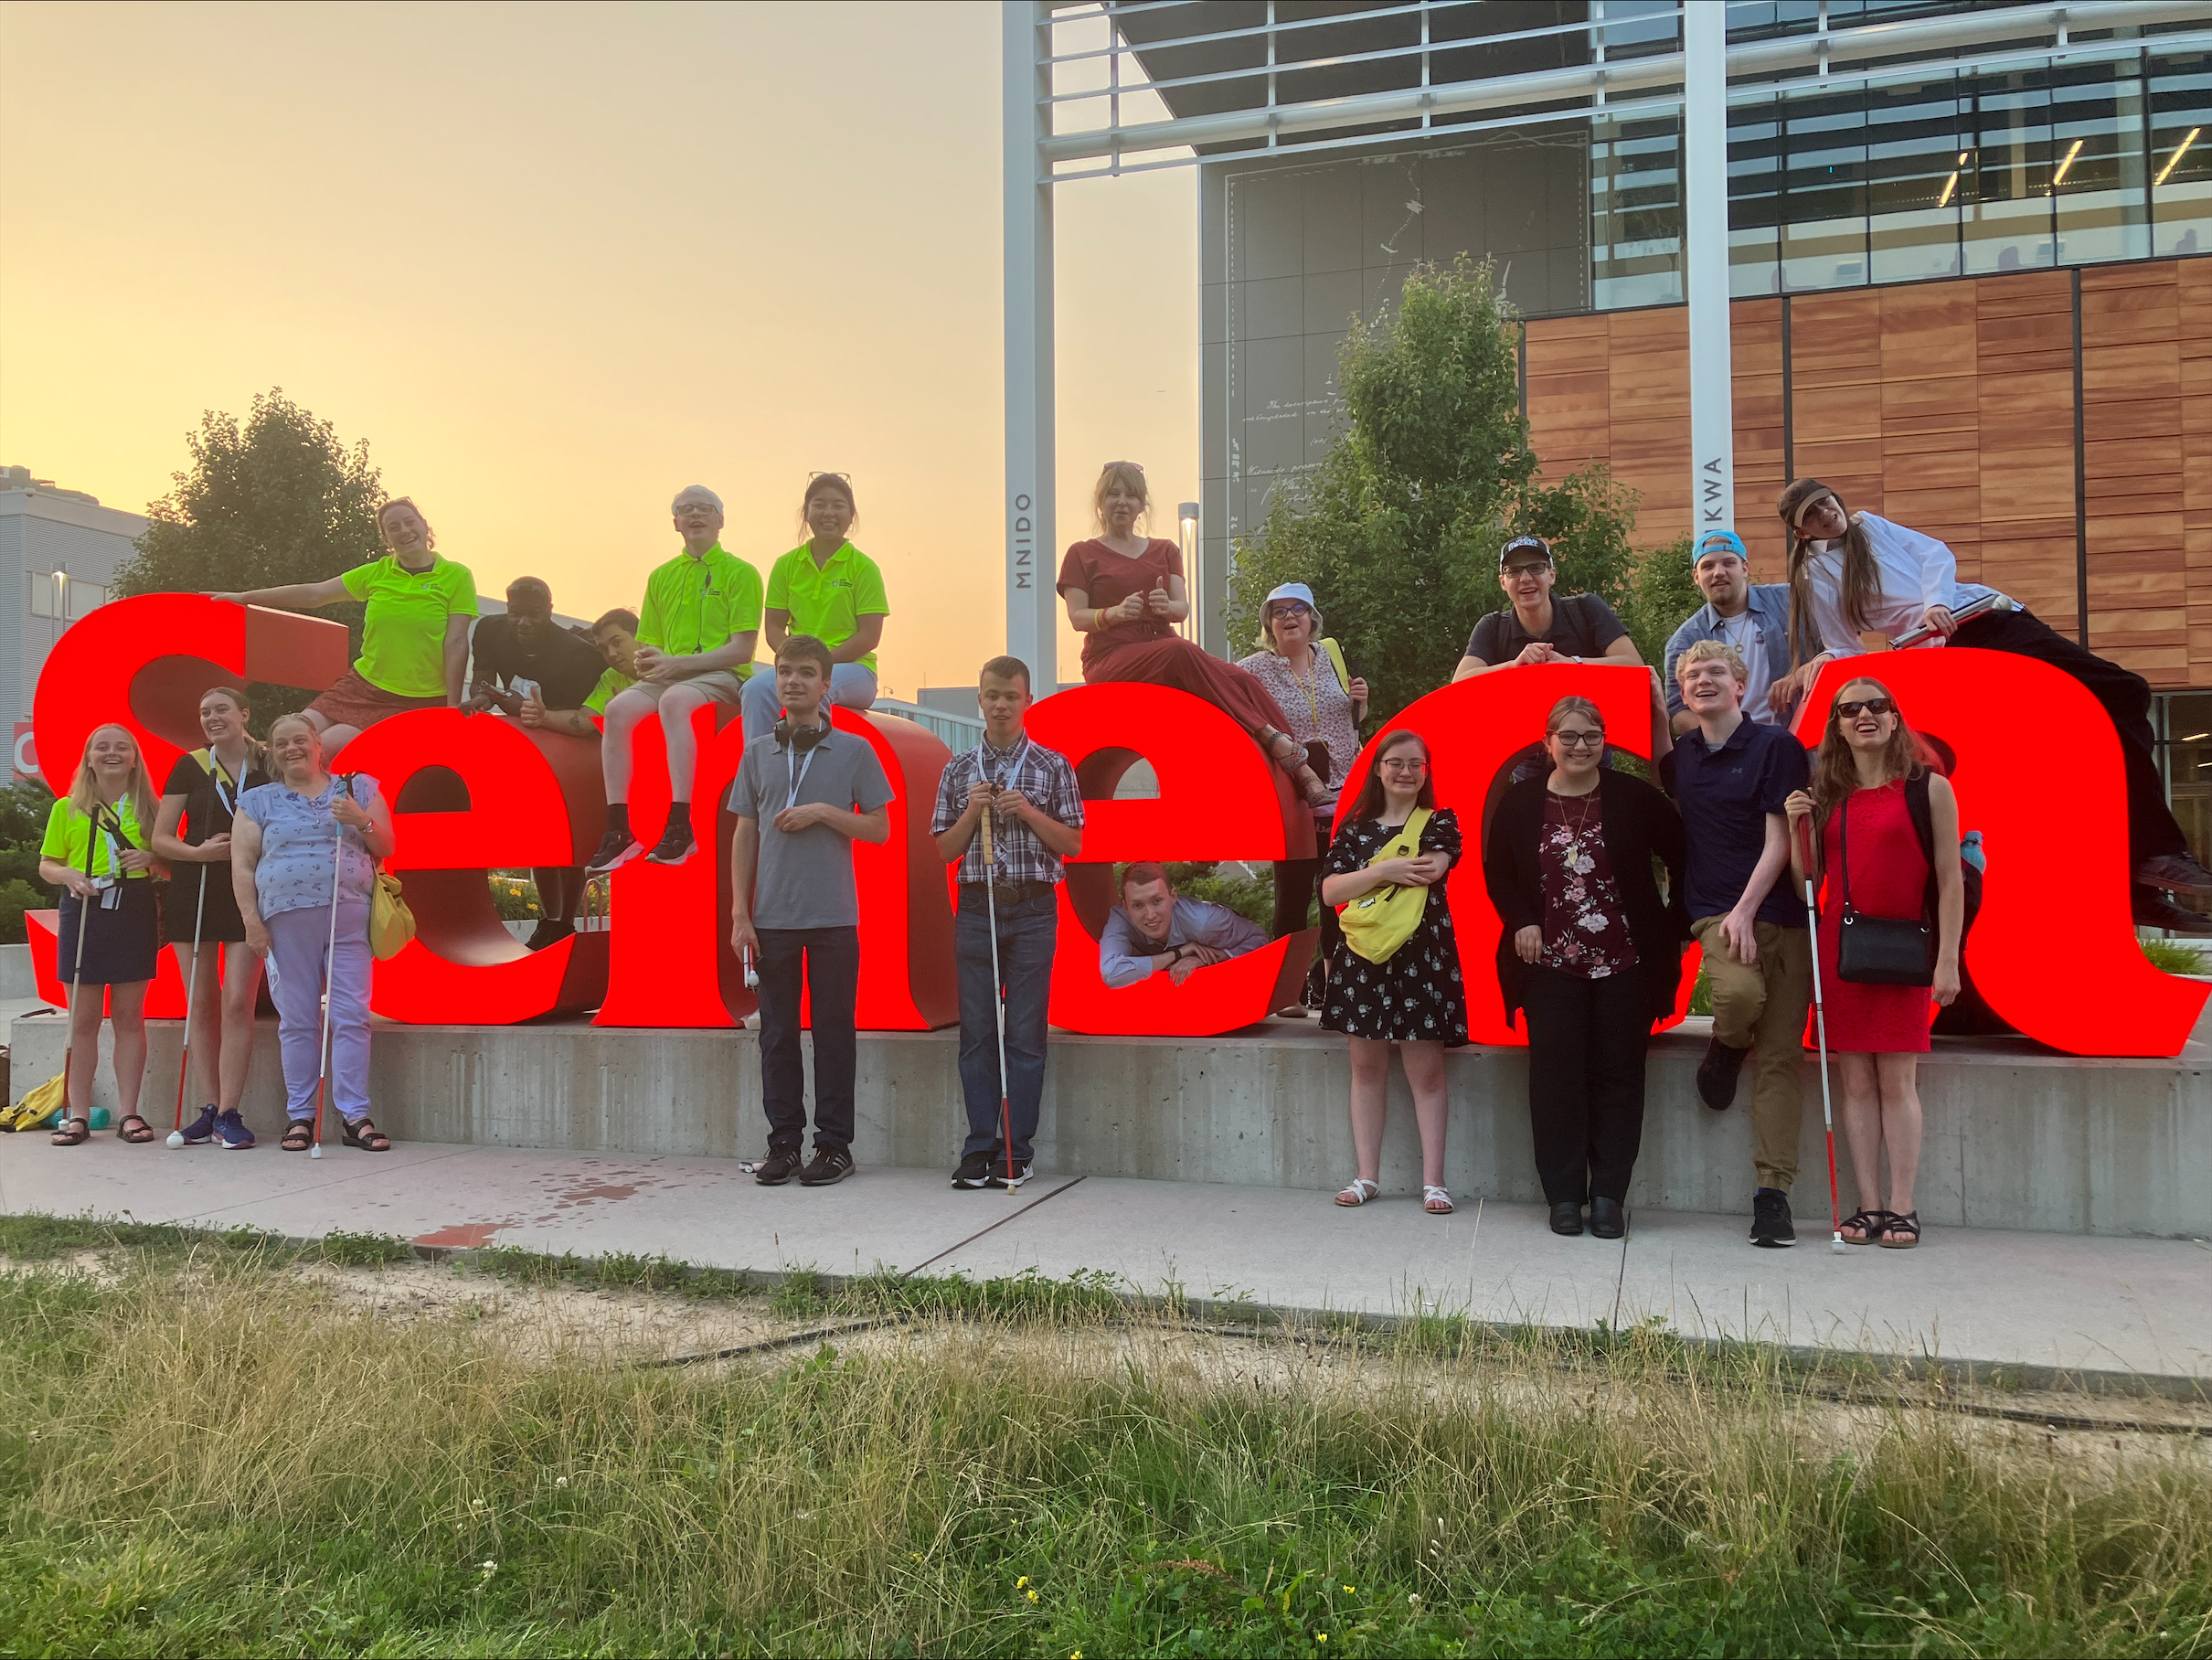 A group of people impacted by blindness pose with a glowing red sign reading "Seneca".